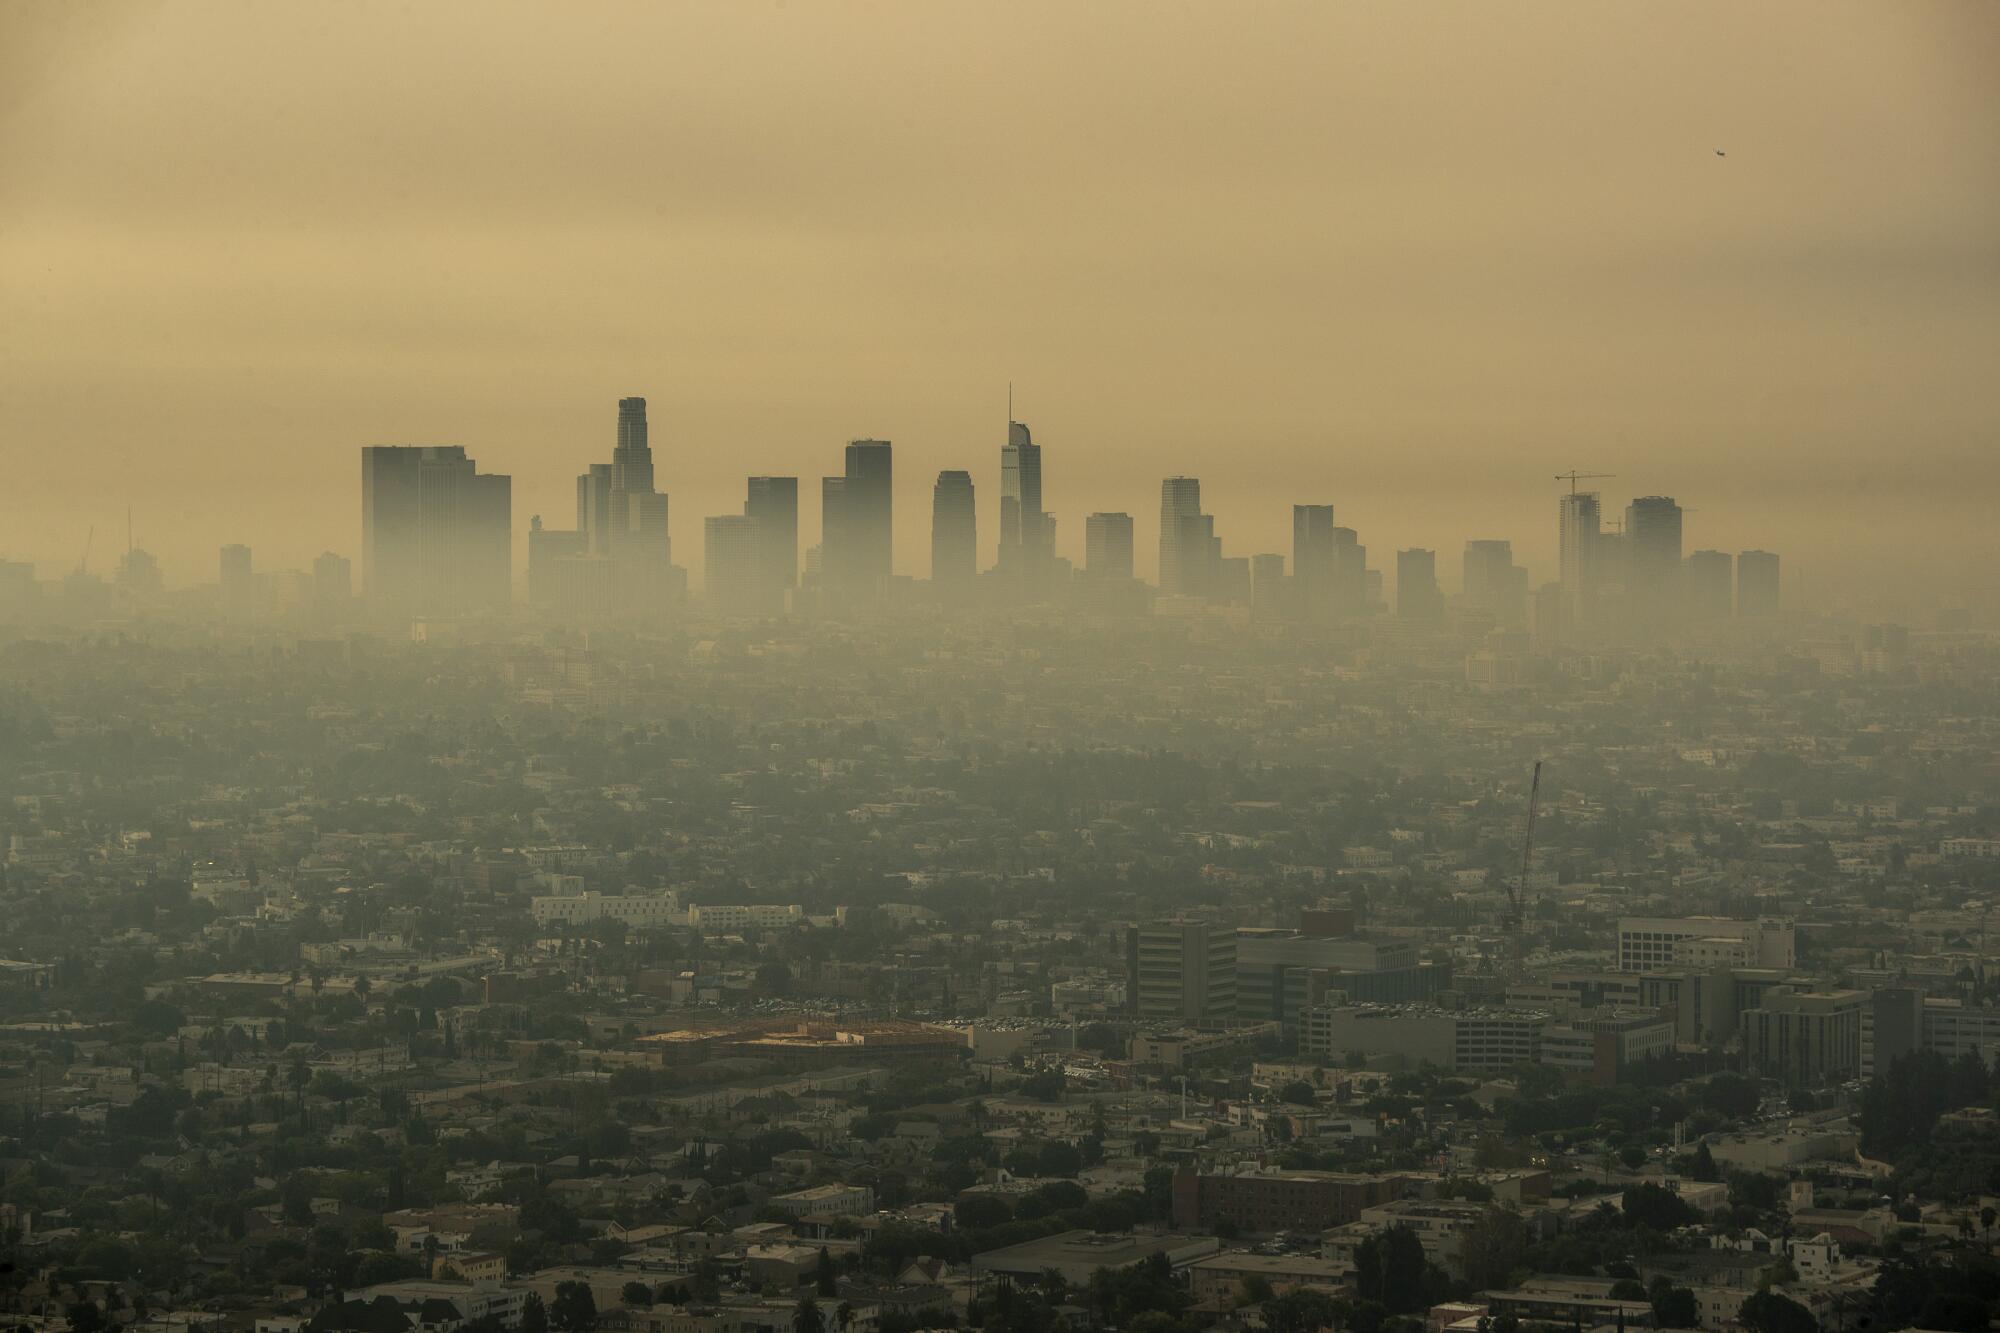 A city skyline is obscured by a thick haze.